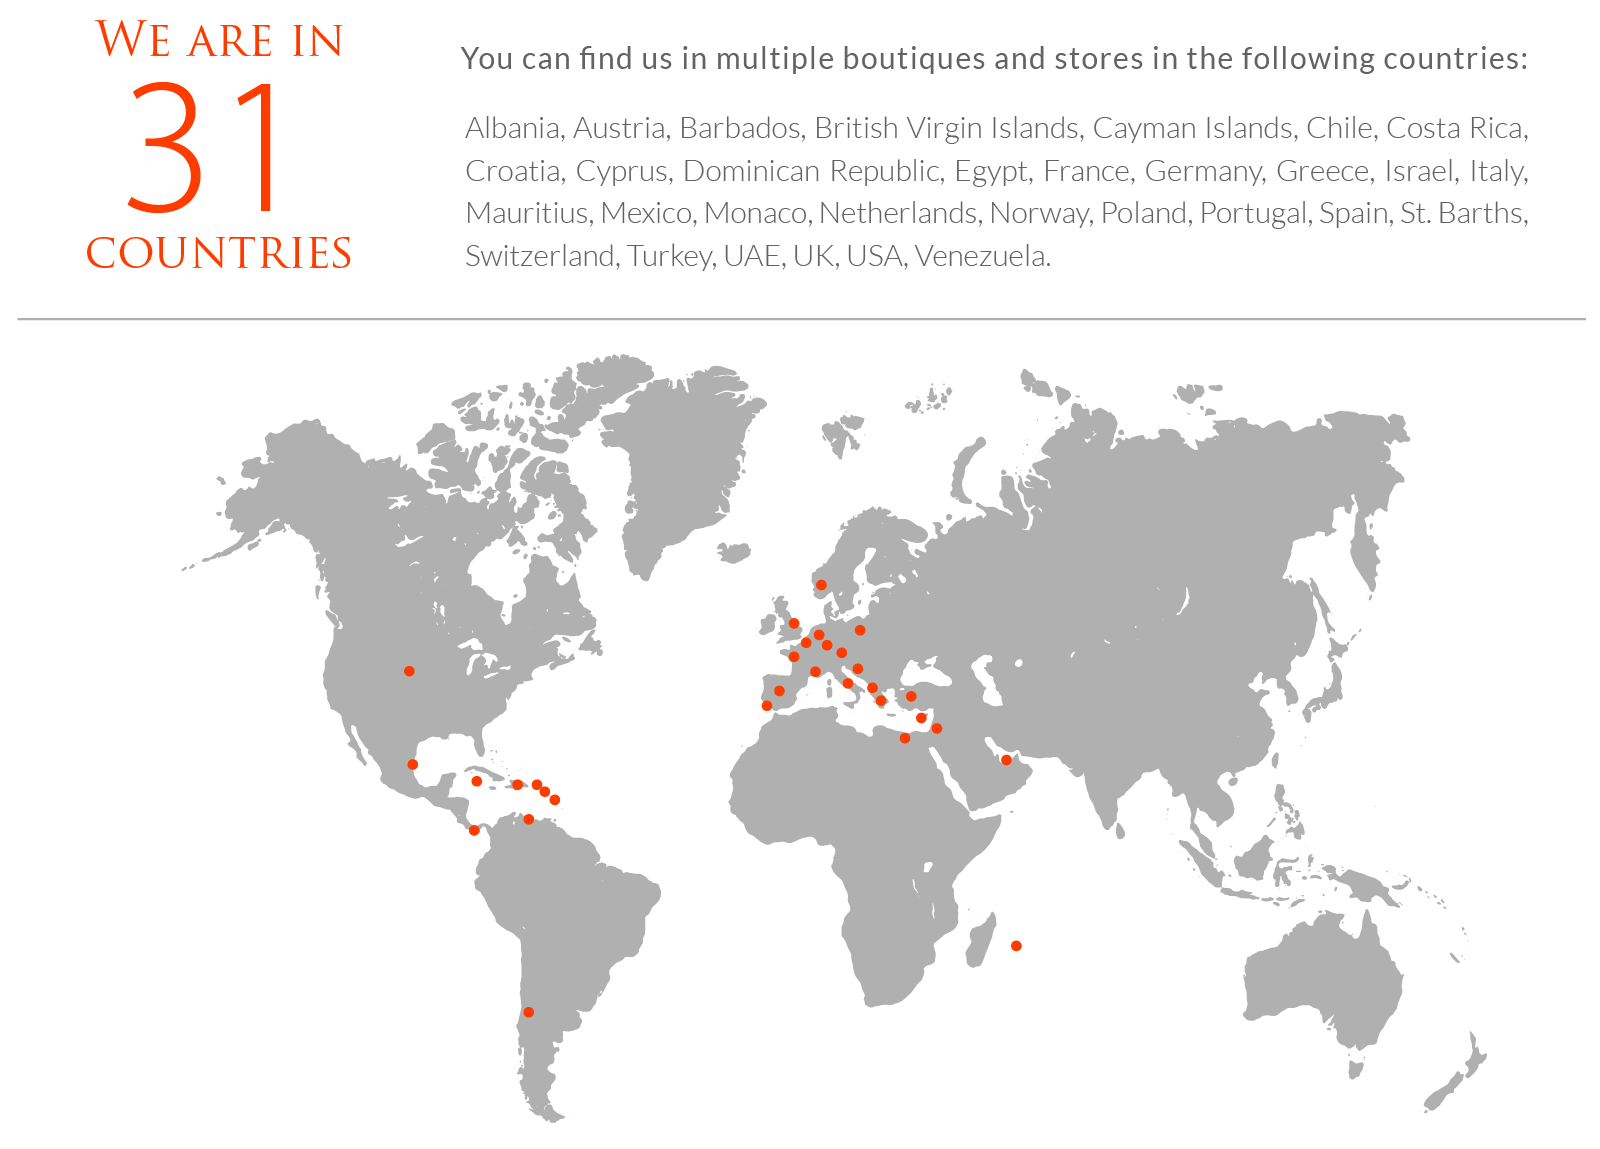 BeMystique Locations - We are in 31 Countries across the world